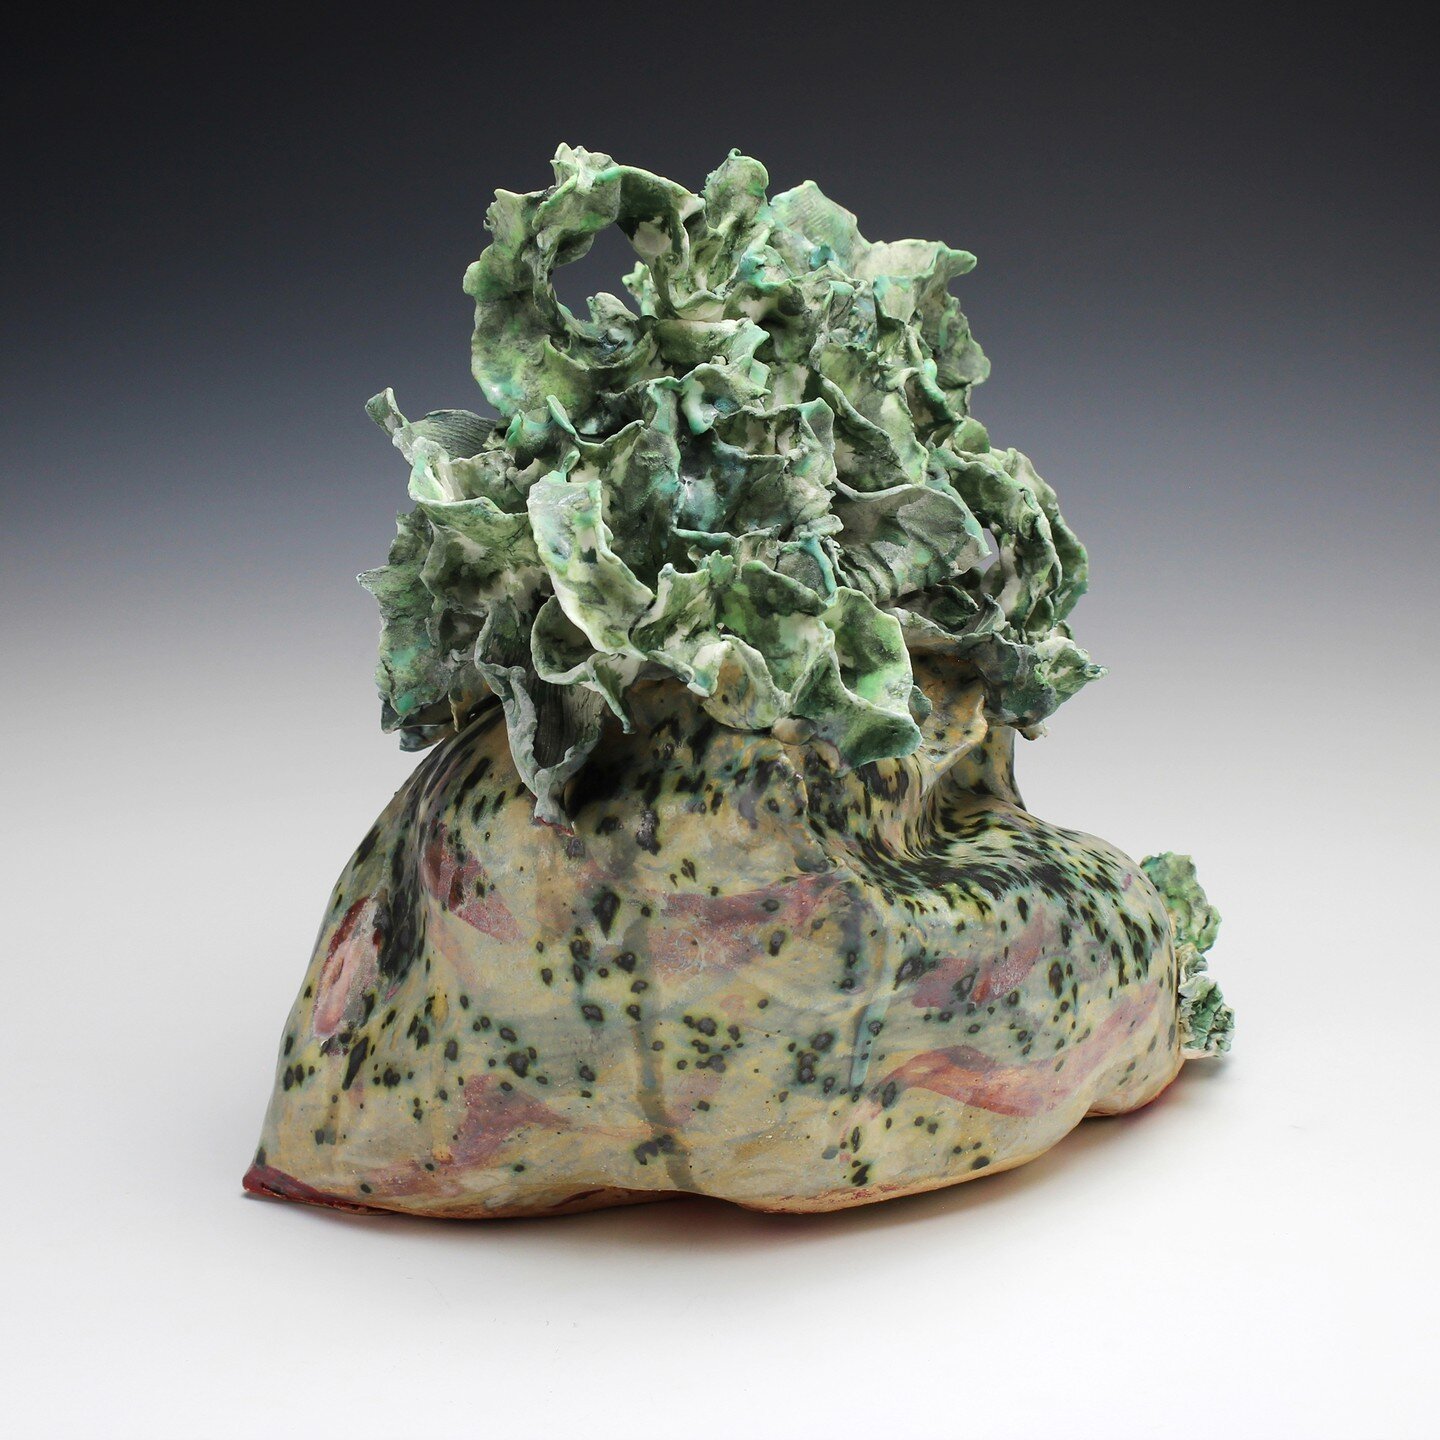 DEPAYSEMENT| Colored porcelain and stoneware with glaze | 11&quot; x 8.5&quot; x 11&quot;|2022 In France, the feeling of being an outsider is known as depaysement. Sometimes it is frustrating, leaving us feeling unsettled and out of place.
&mdash; Th